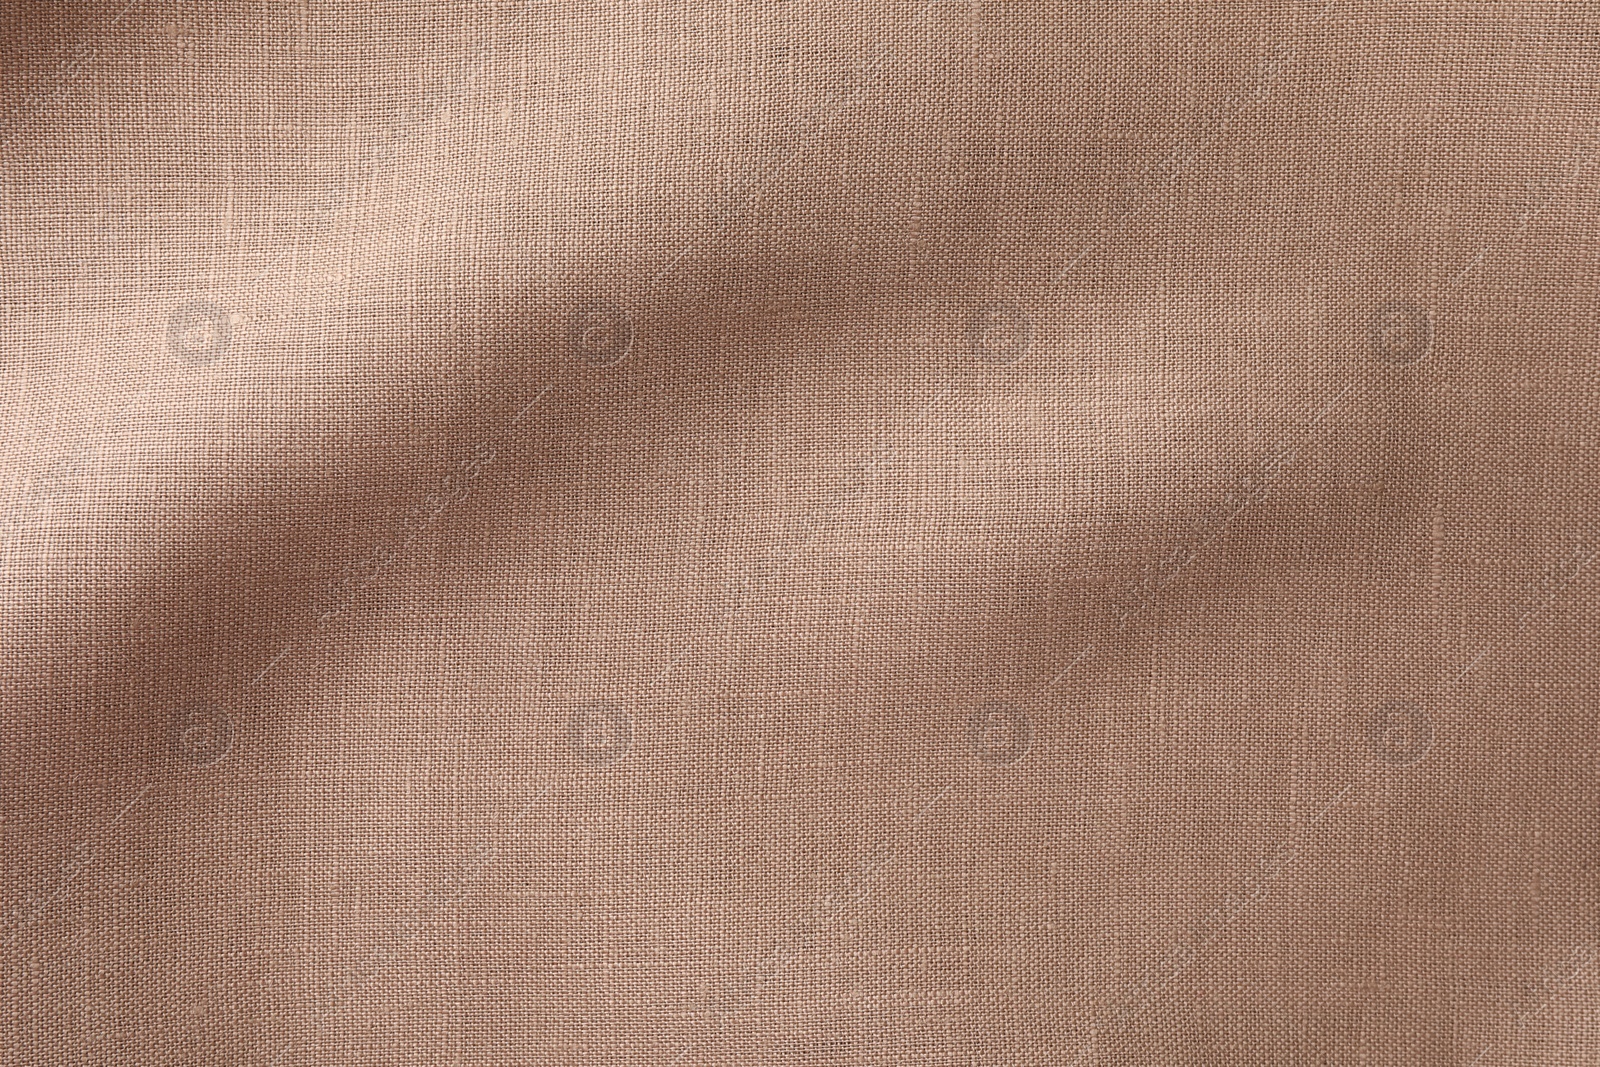 Photo of Texture of brown crumpled fabric as background, top view